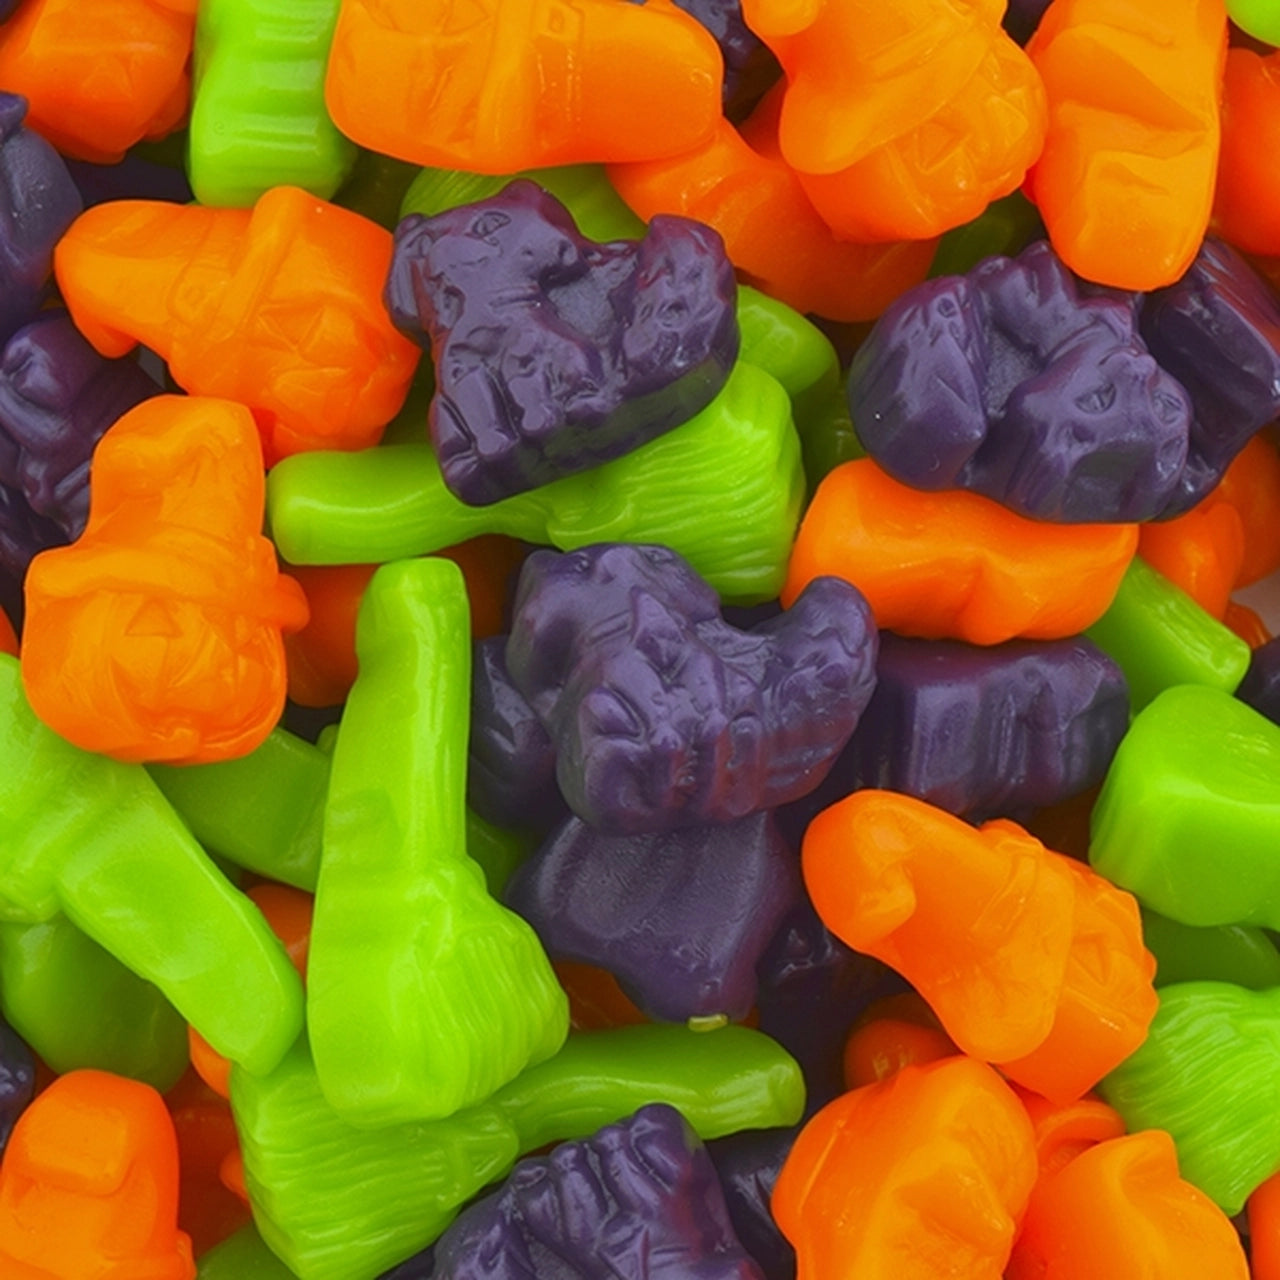 Halloween Gummy Mix with Orange flavored jack-o'-lanterns, Grape flavored kittens, and Green Apple flavored witches' broomsticks.